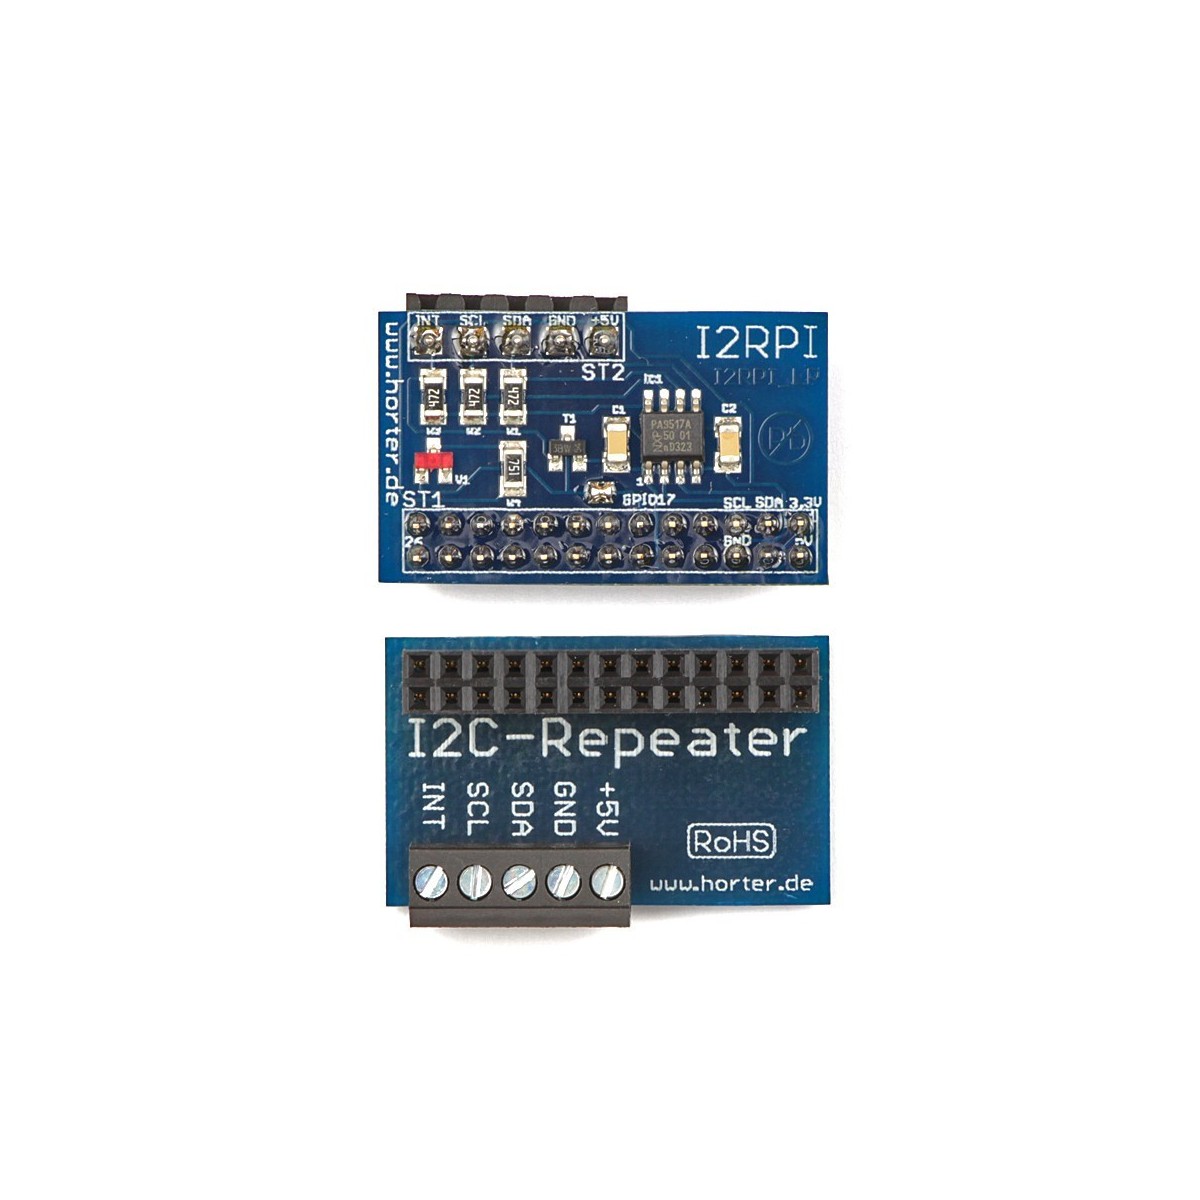 I2C-Repeater for Raspberry PI finished